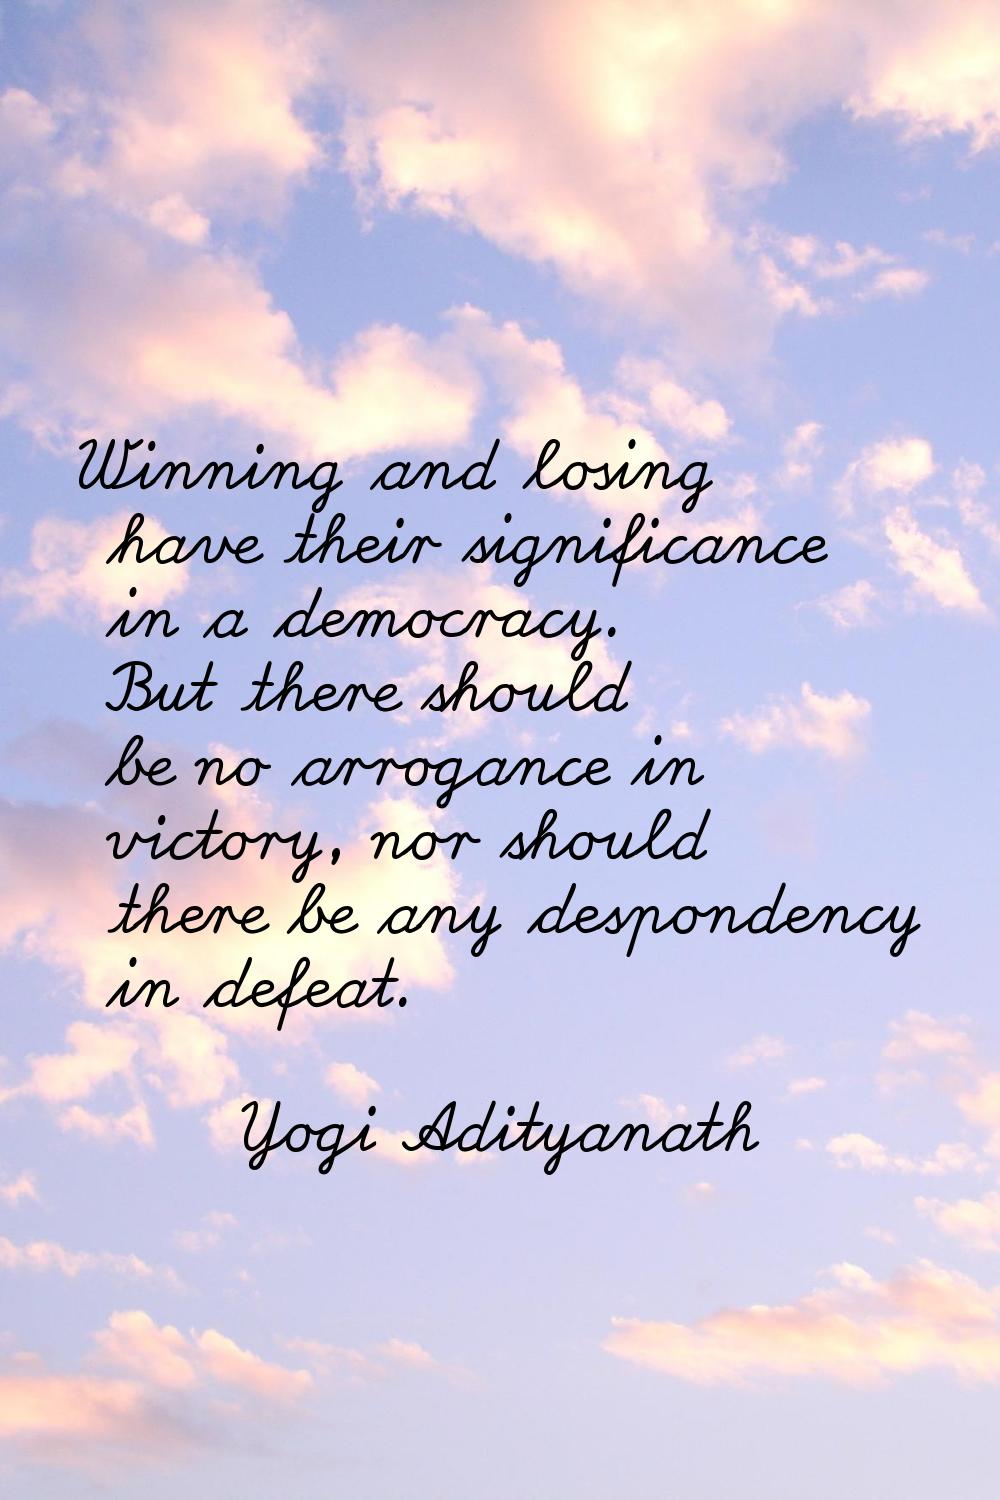 Winning and losing have their significance in a democracy. But there should be no arrogance in vict